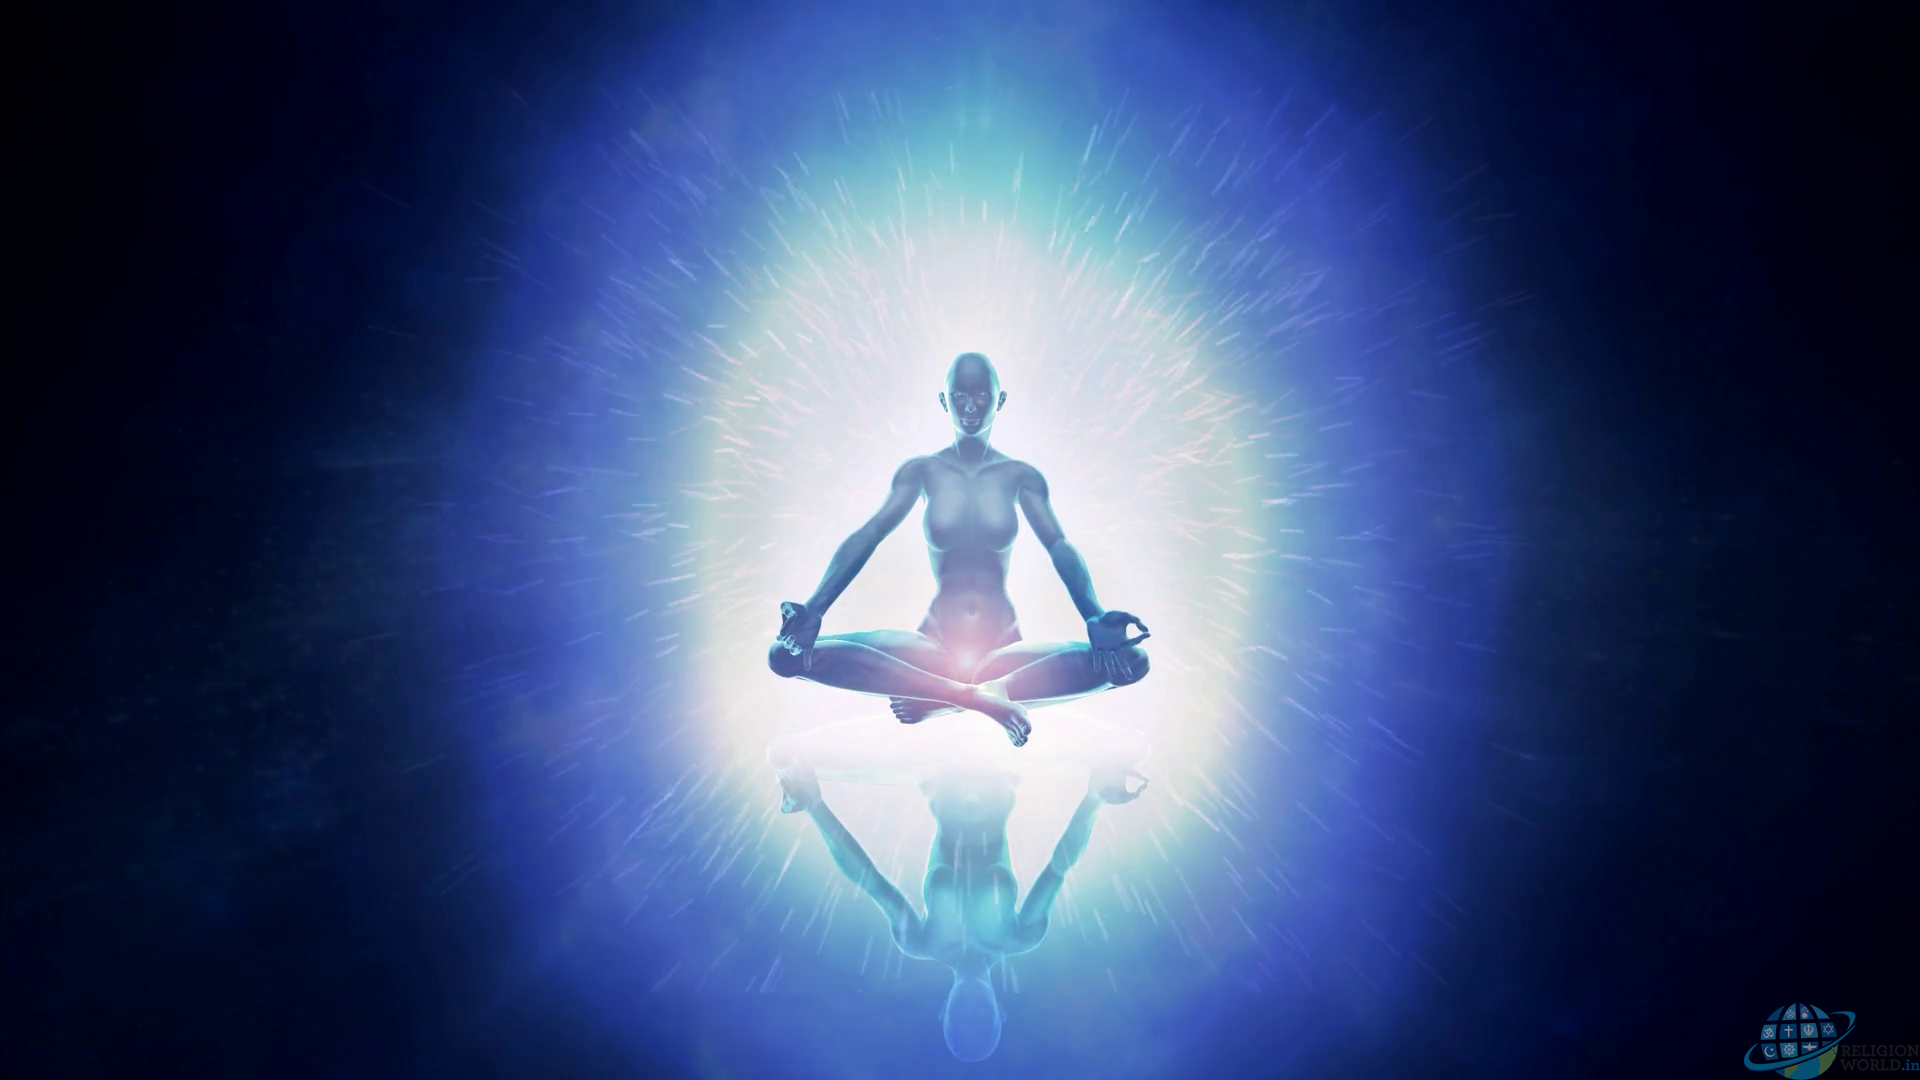 meditation-leading-to-the-enlightenment-and-nirvana-chakras-opening_srdwh7k1g_thumbnail-full01.png